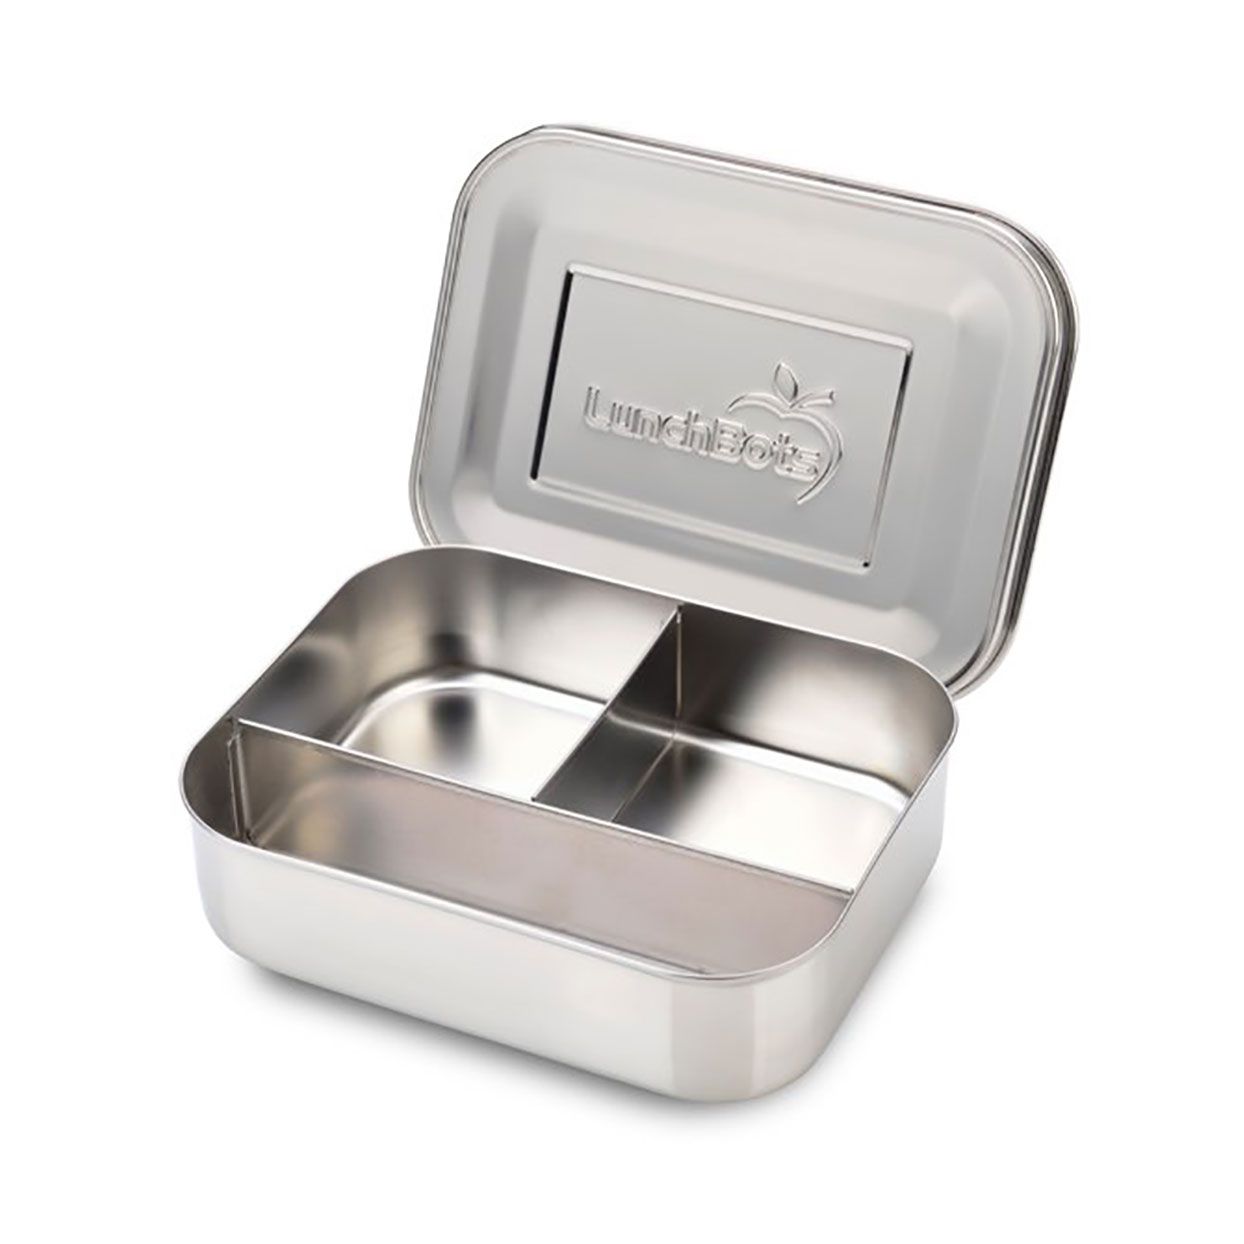 Lunchbots Stainless Steel Trio Bento Box